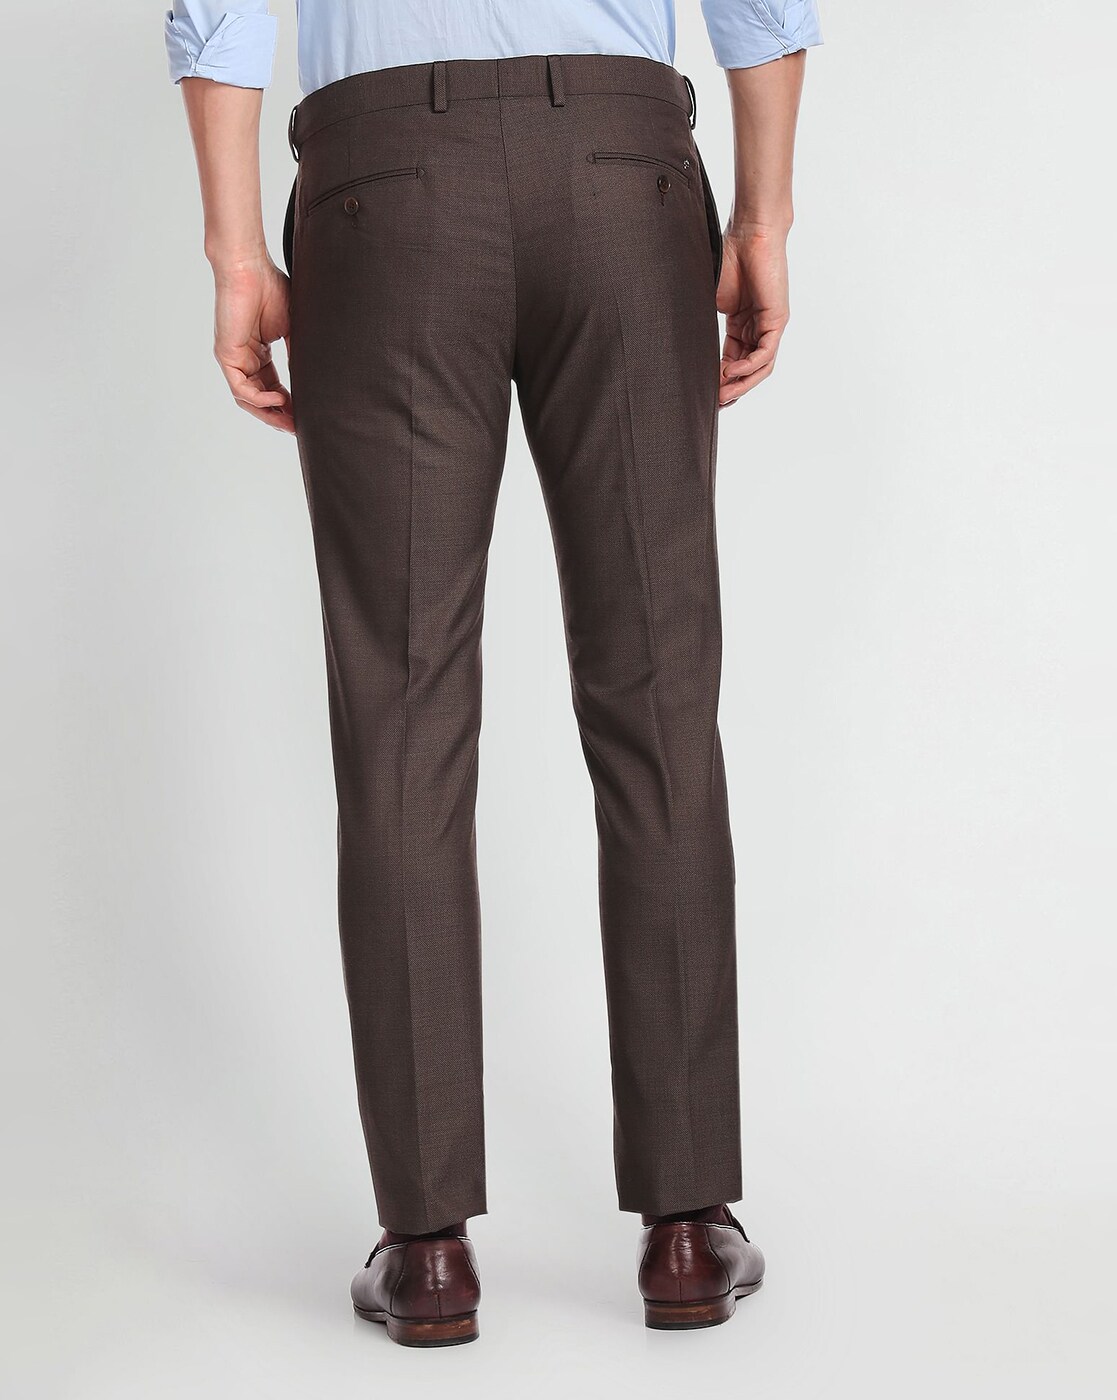 Brown trouser pants, Women's Fashion, Bottoms, Other Bottoms on Carousell